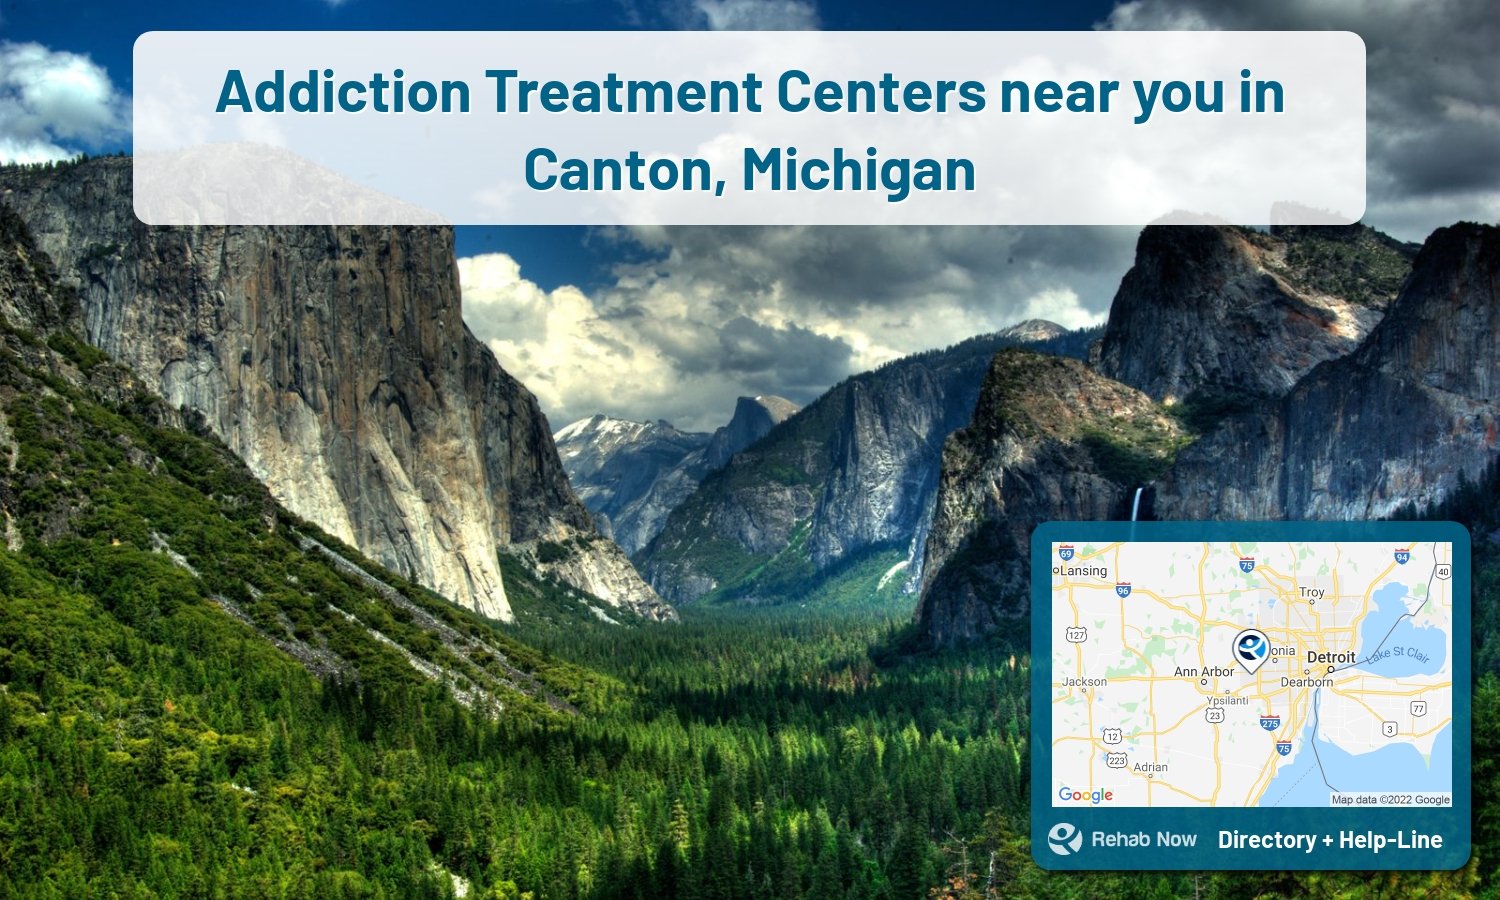 View options, availability, treatment methods, and more, for drug rehab and alcohol treatment in Canton, Michigan